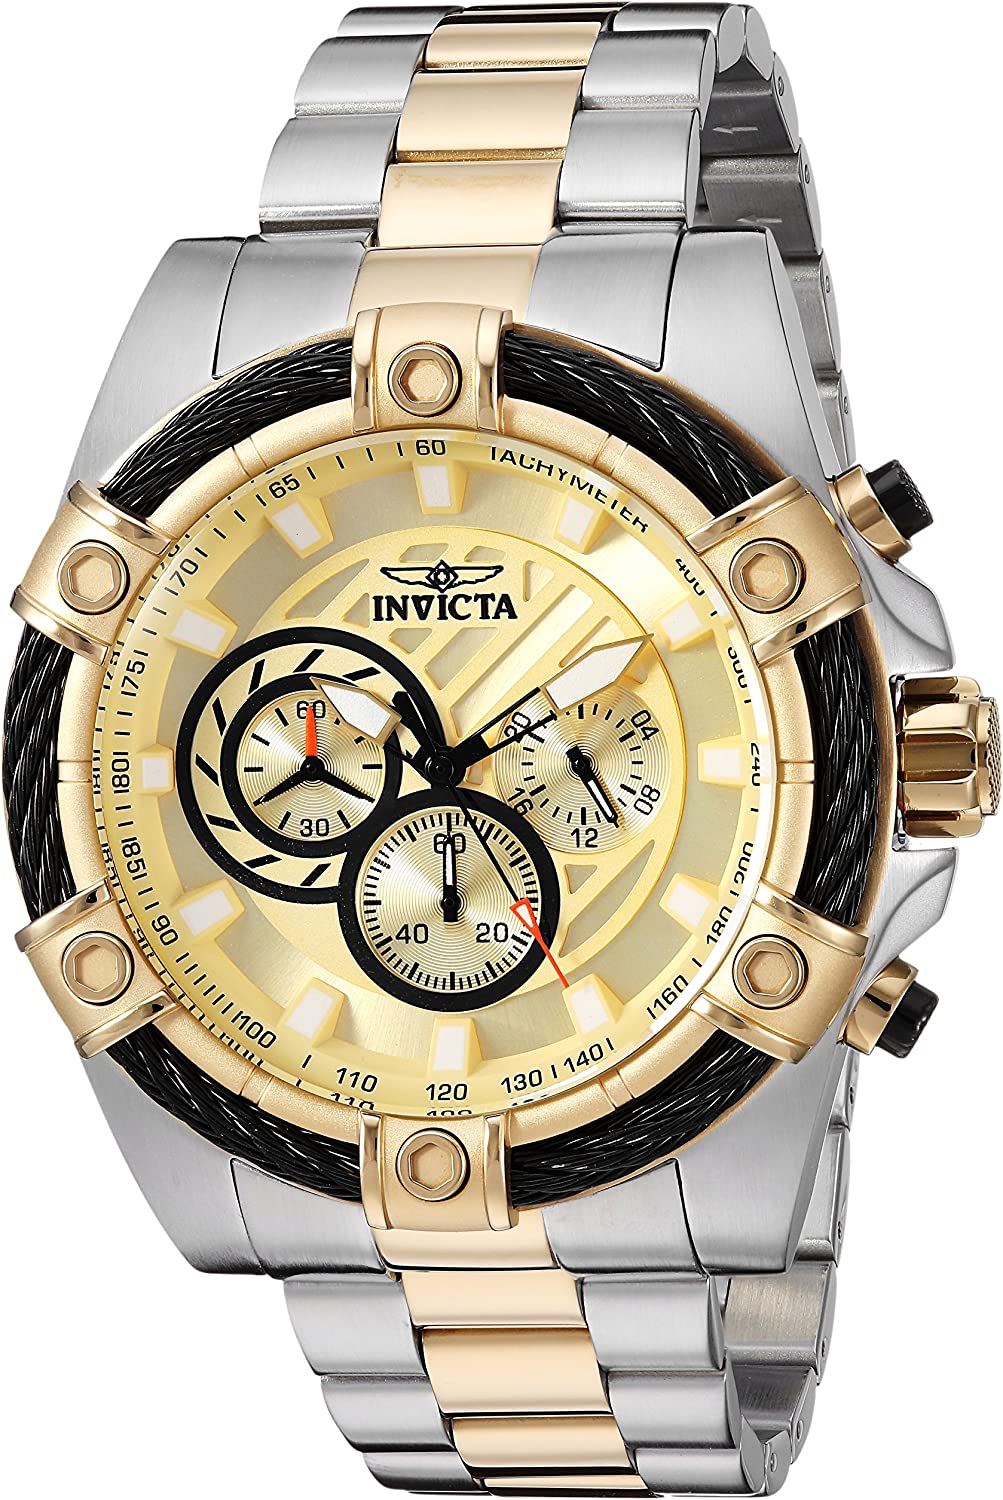 Invicta Men's Bolt Quartz Watch with Stainless-Steel Strap, Gold, Silver, Two Tone, 26 (Model: 25518)